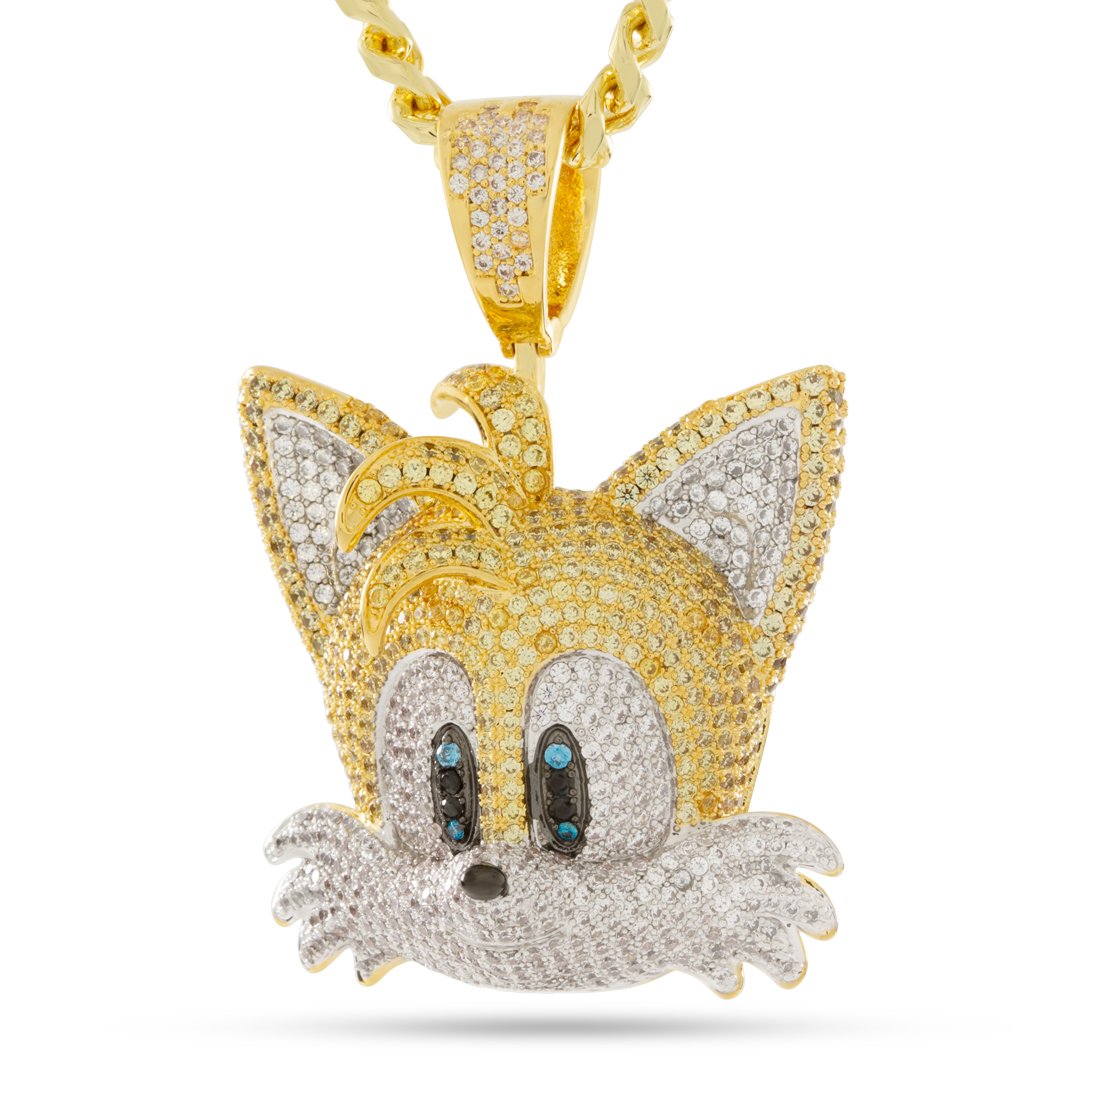 Tails Necklace, Sonic the Hedgehog Jewelry